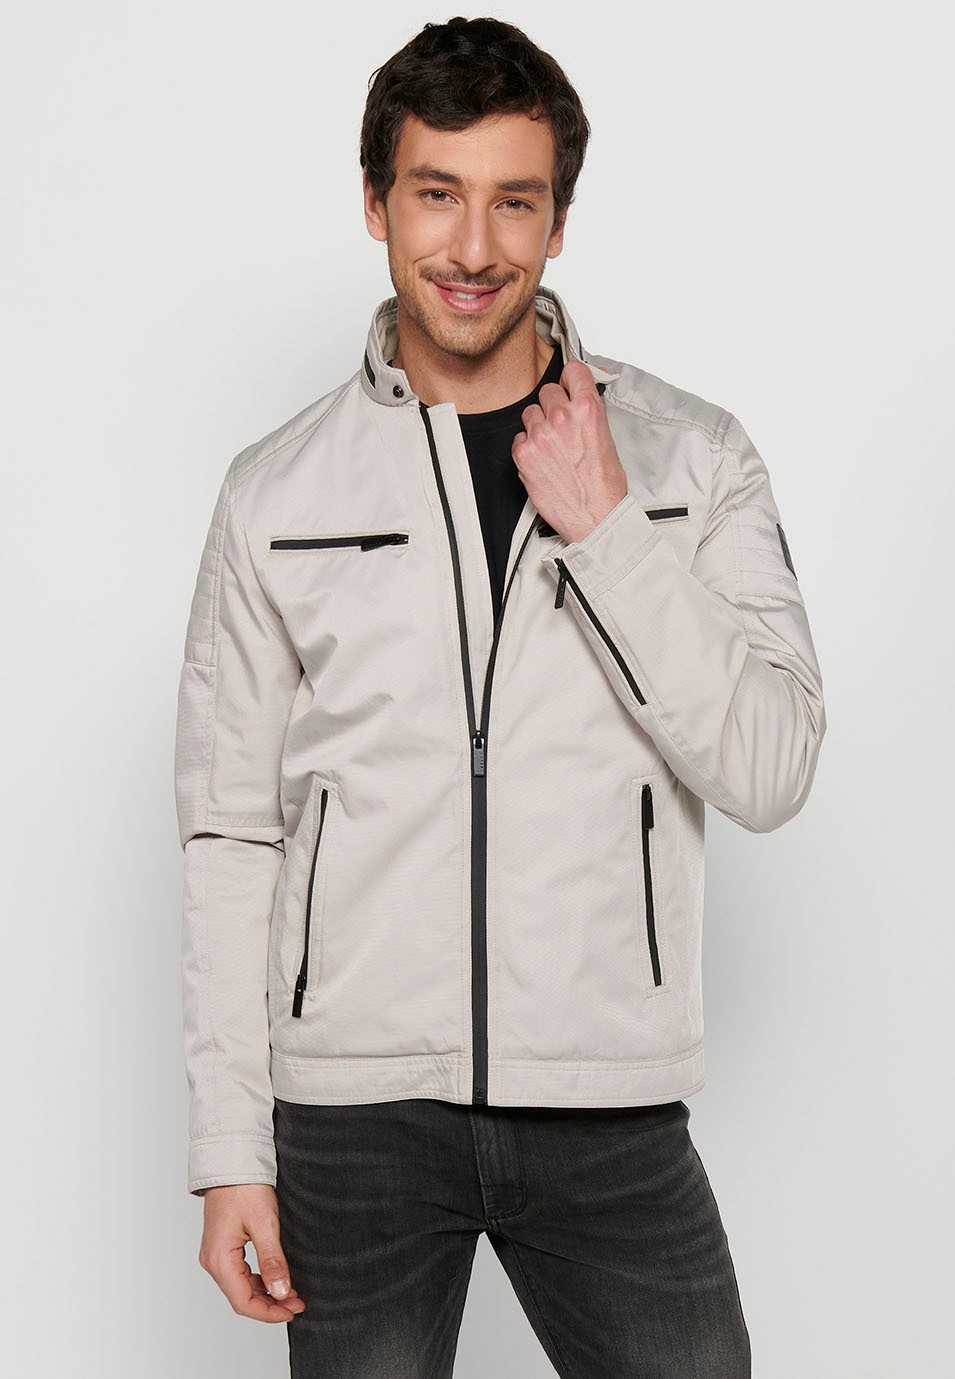 Beige Long-sleeved Jacket with Round Neck and Front Zipper Closure for Men 1